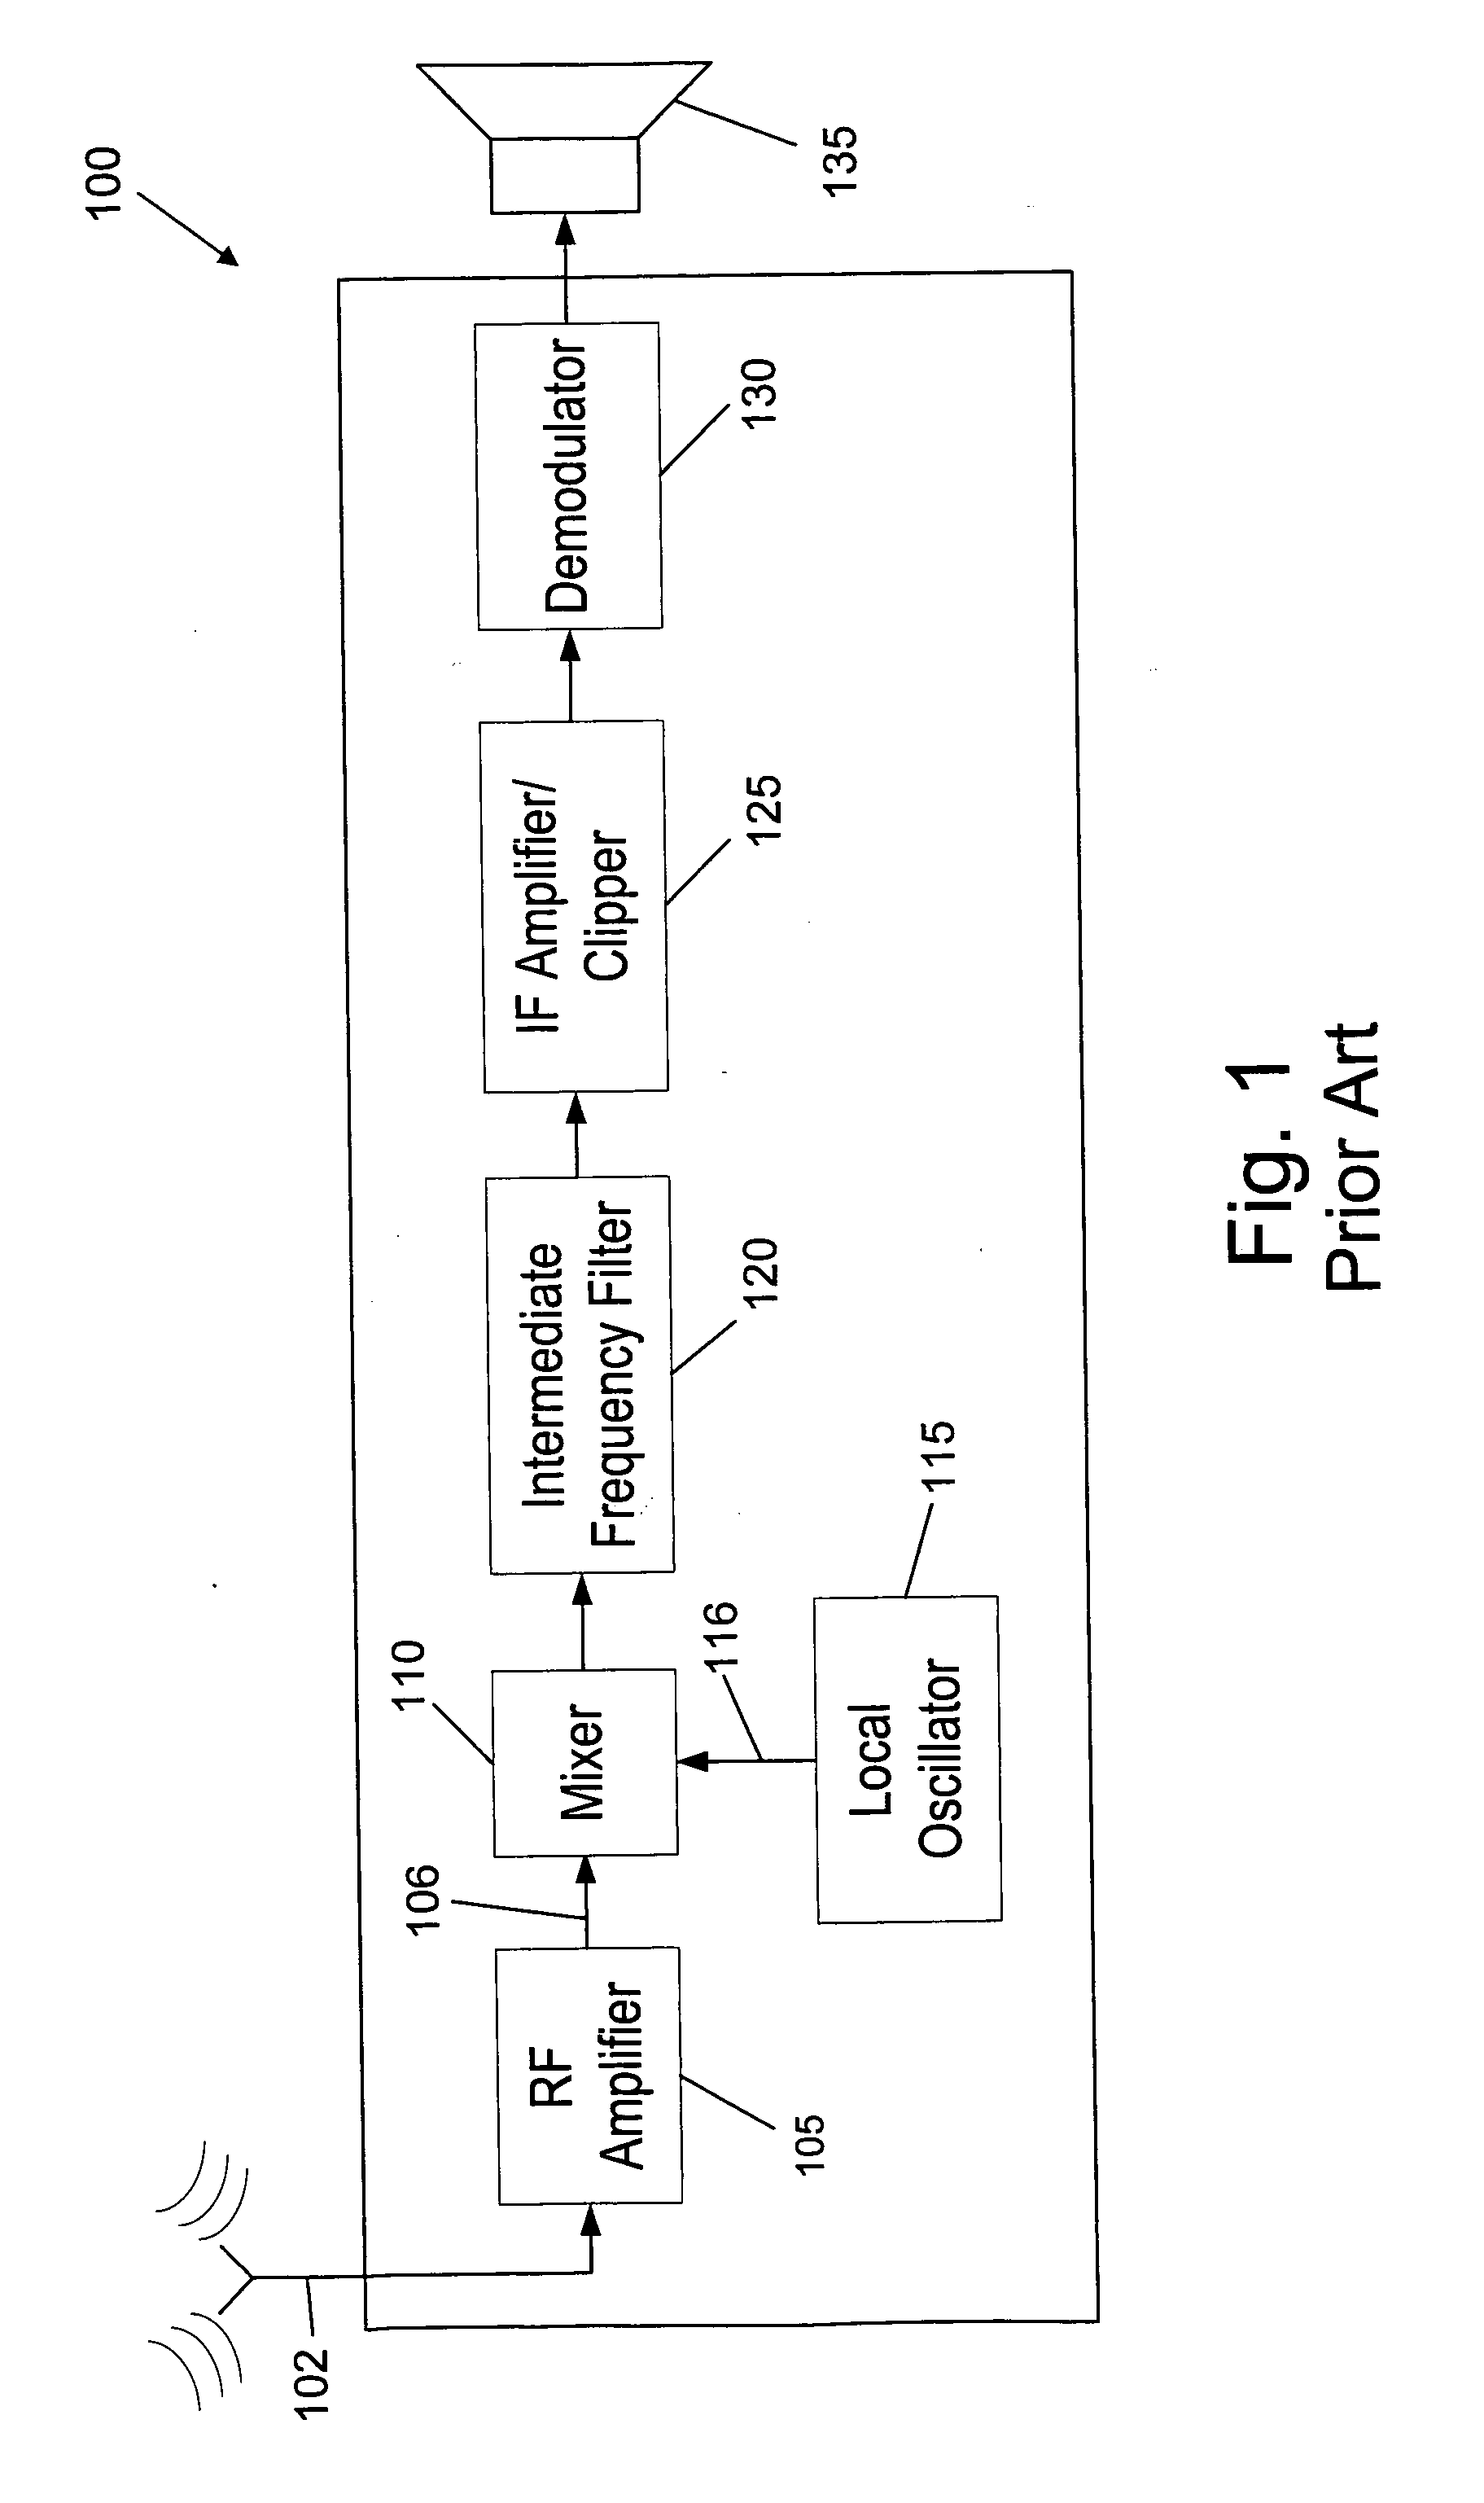 Low power radio frequency receiver